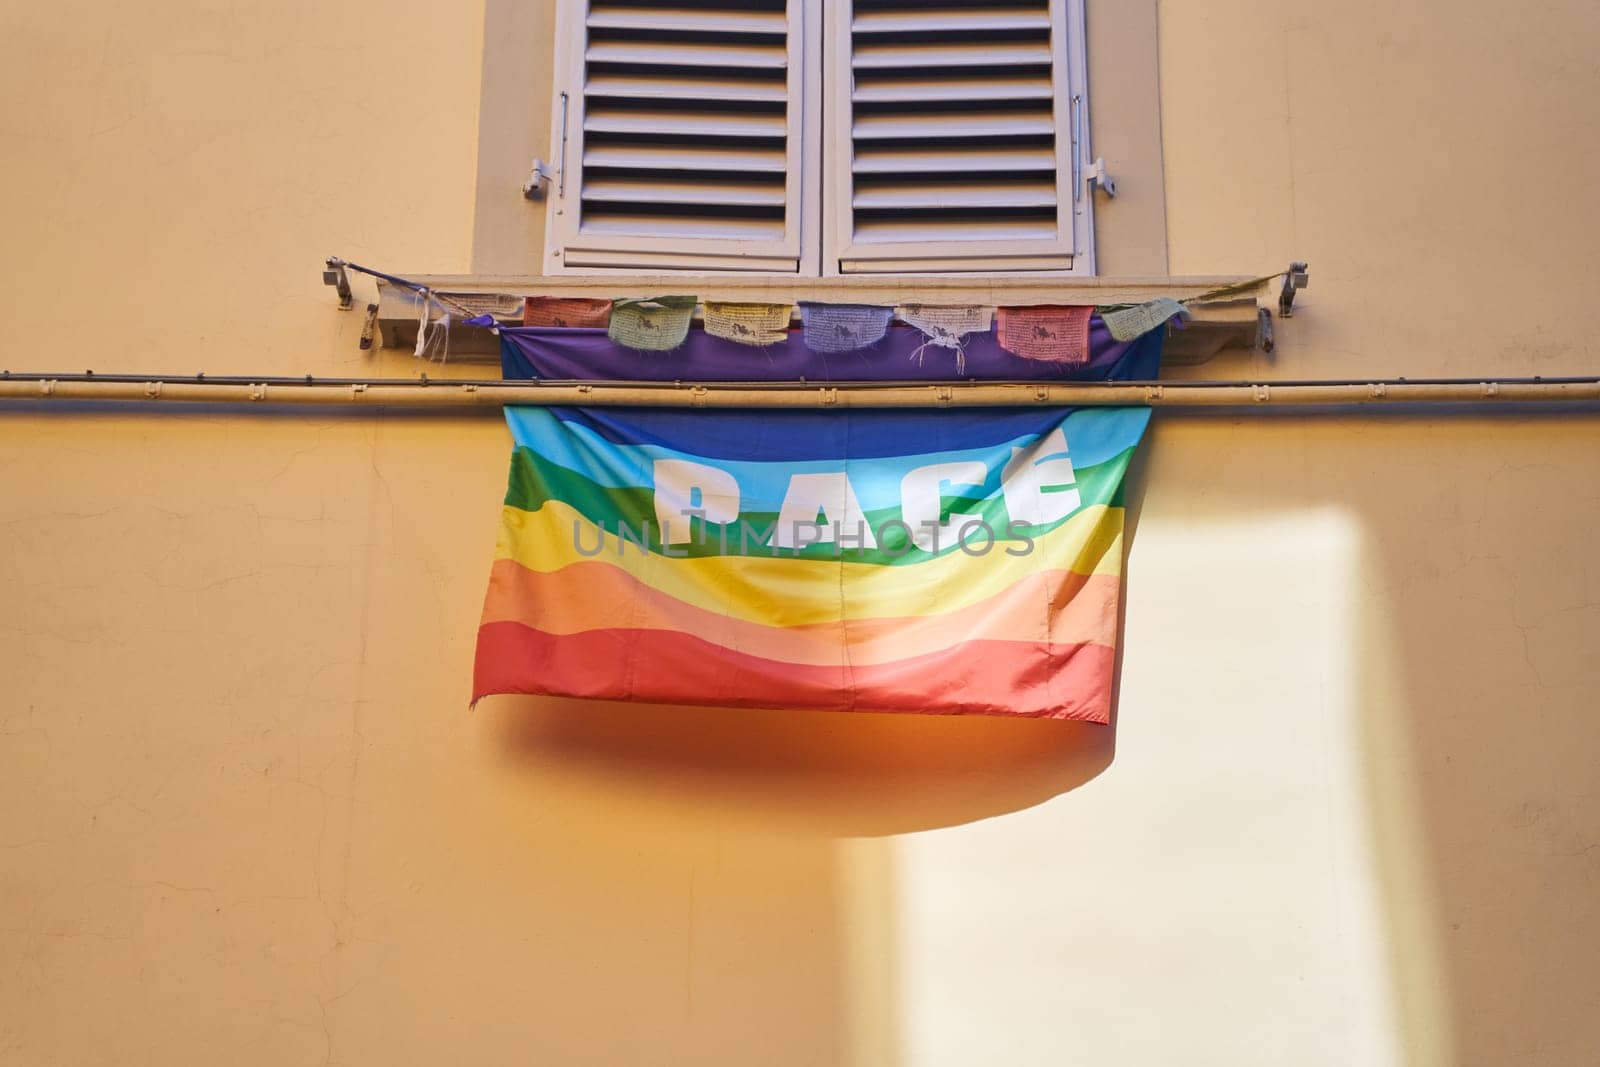 A rainbow flag with the word peace painted in blue, displayed as a creative arts fixture in a rectangular wood frame in a visual arts room